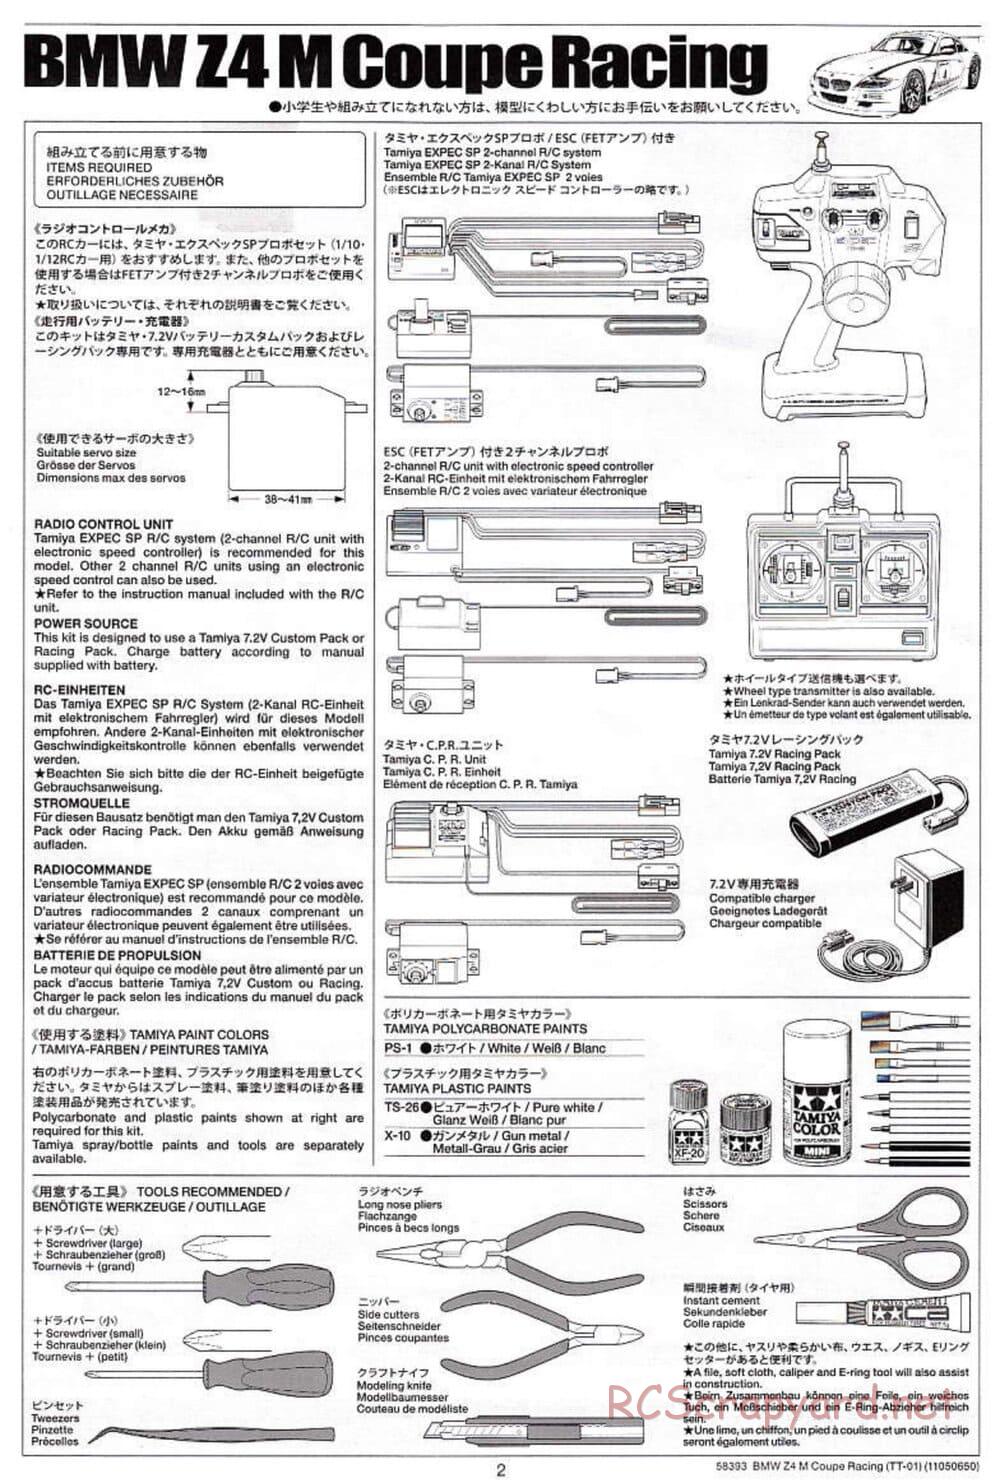 Tamiya - BMW Z4 M Coupe Racing - TT-01 Chassis - Manual - Page 2